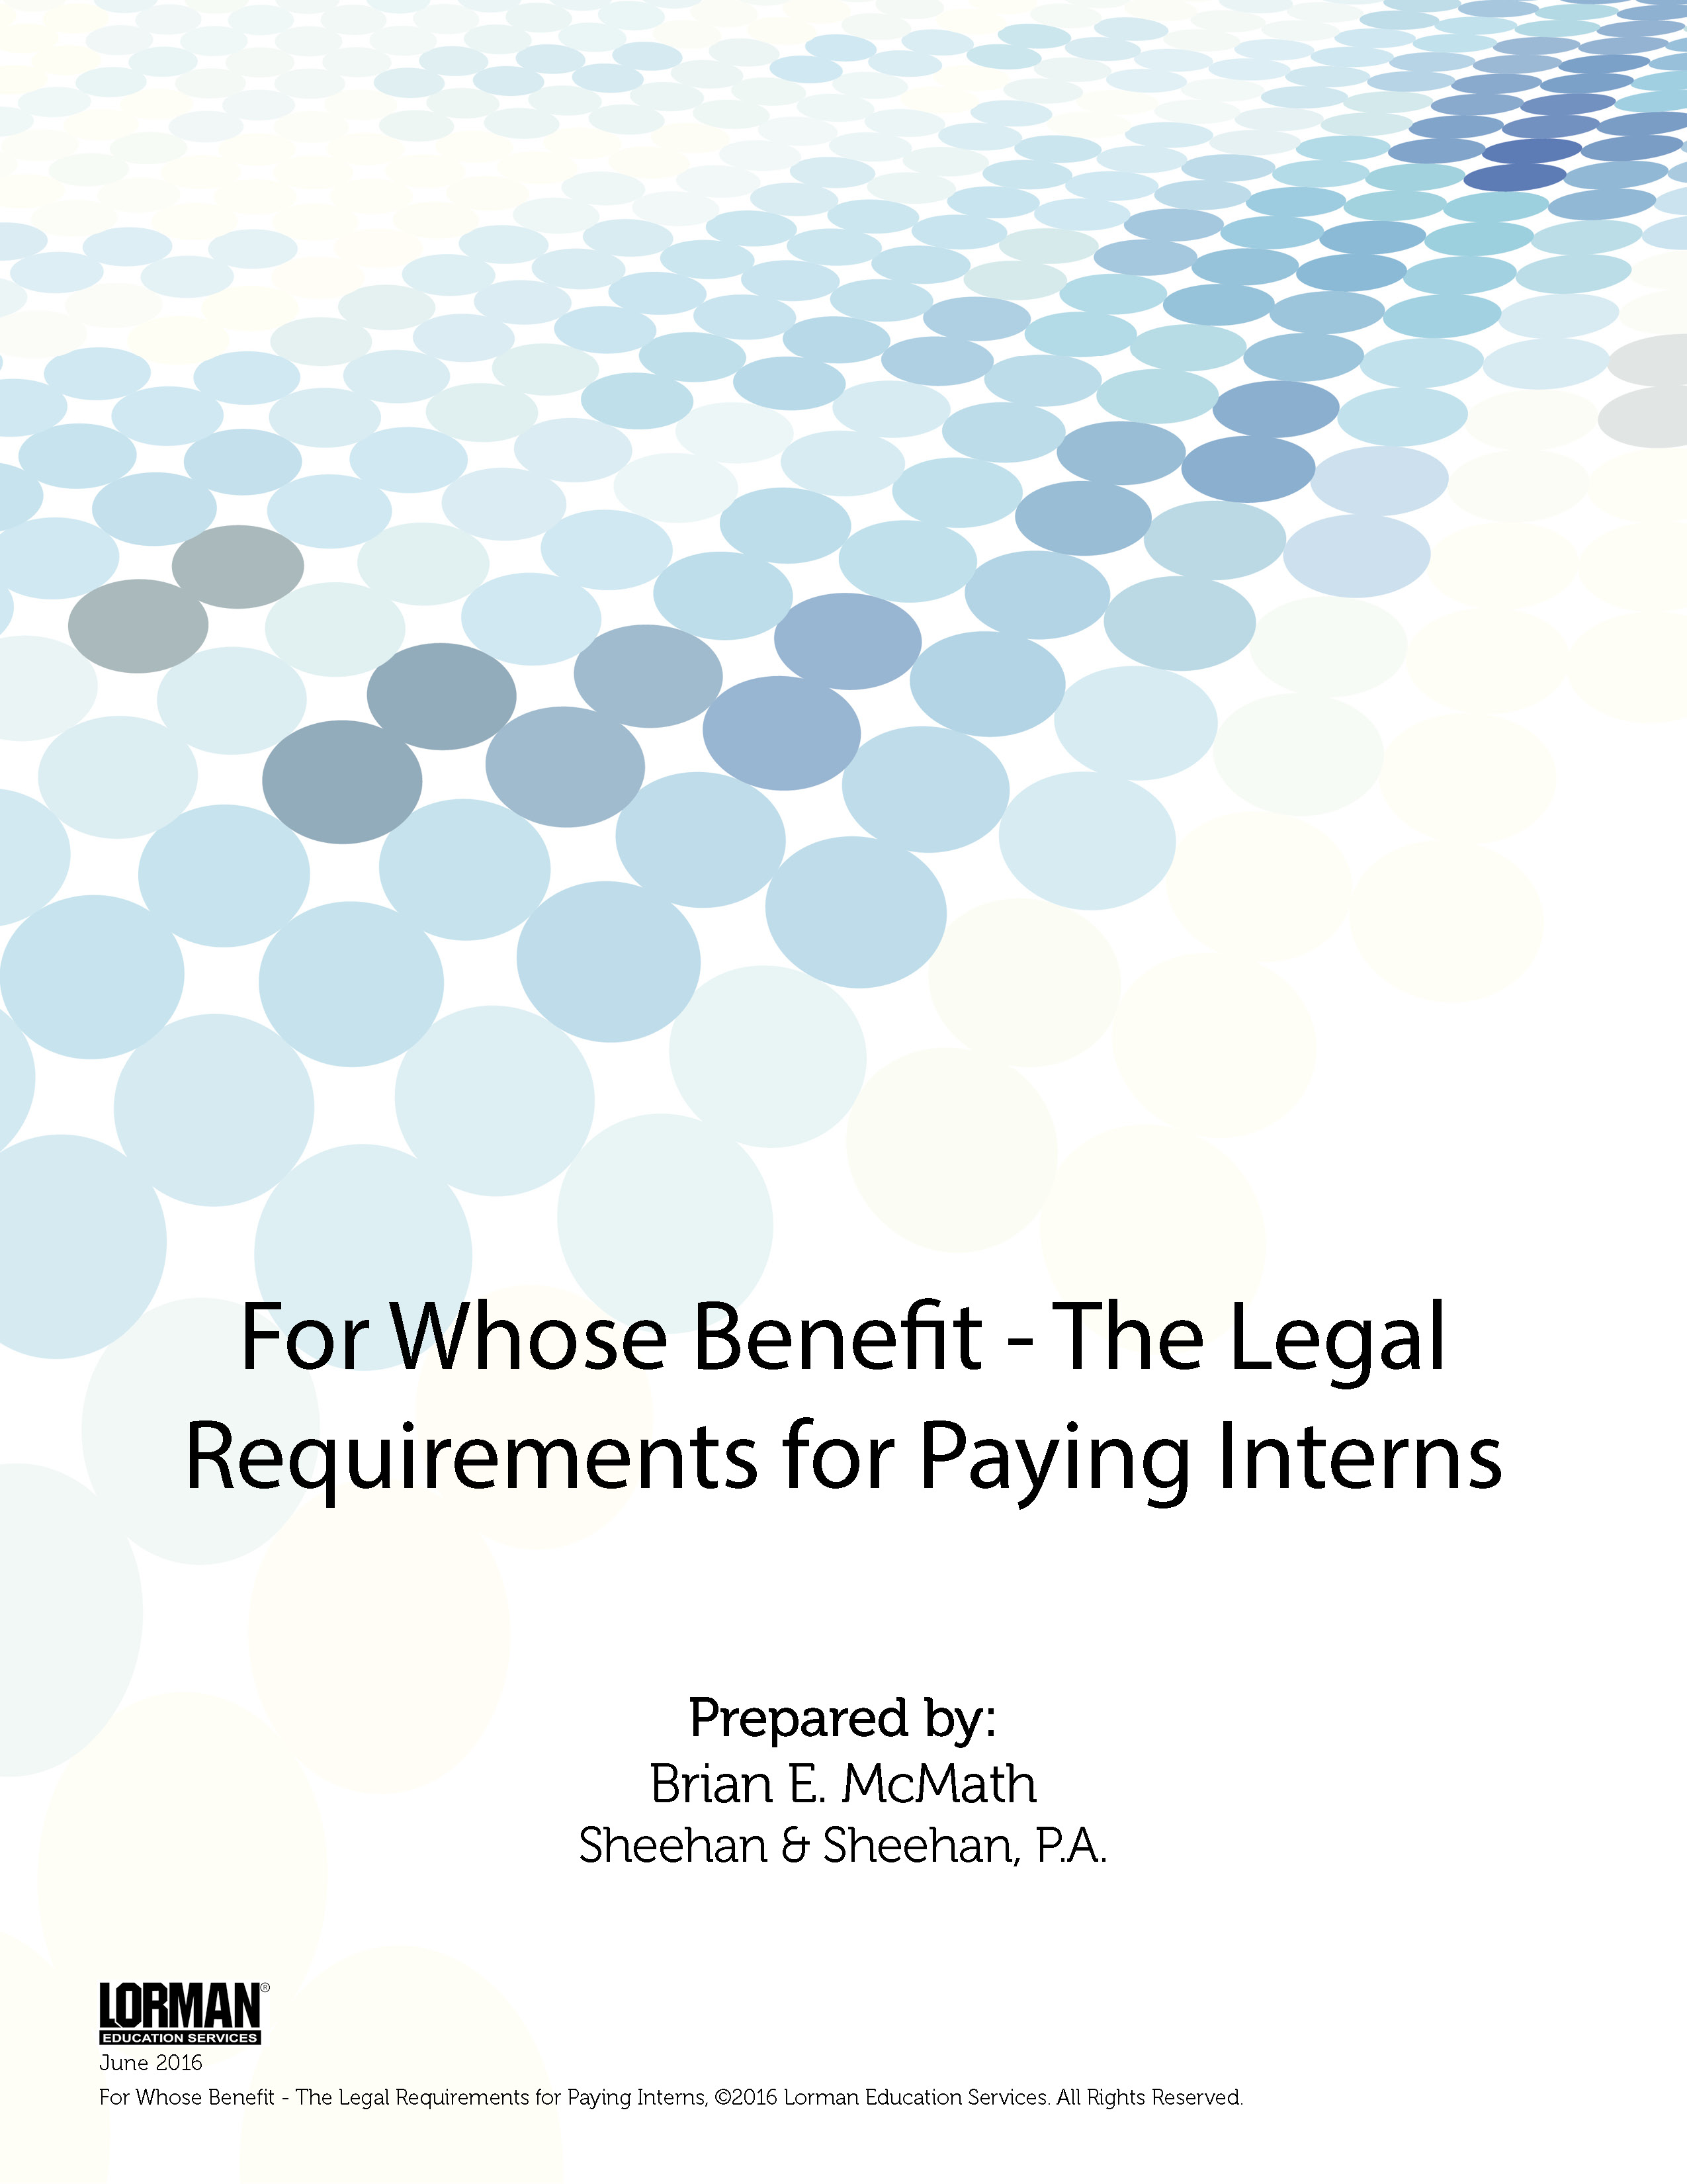 For Whose Benefit - The Legal Requirements for Paying Interns